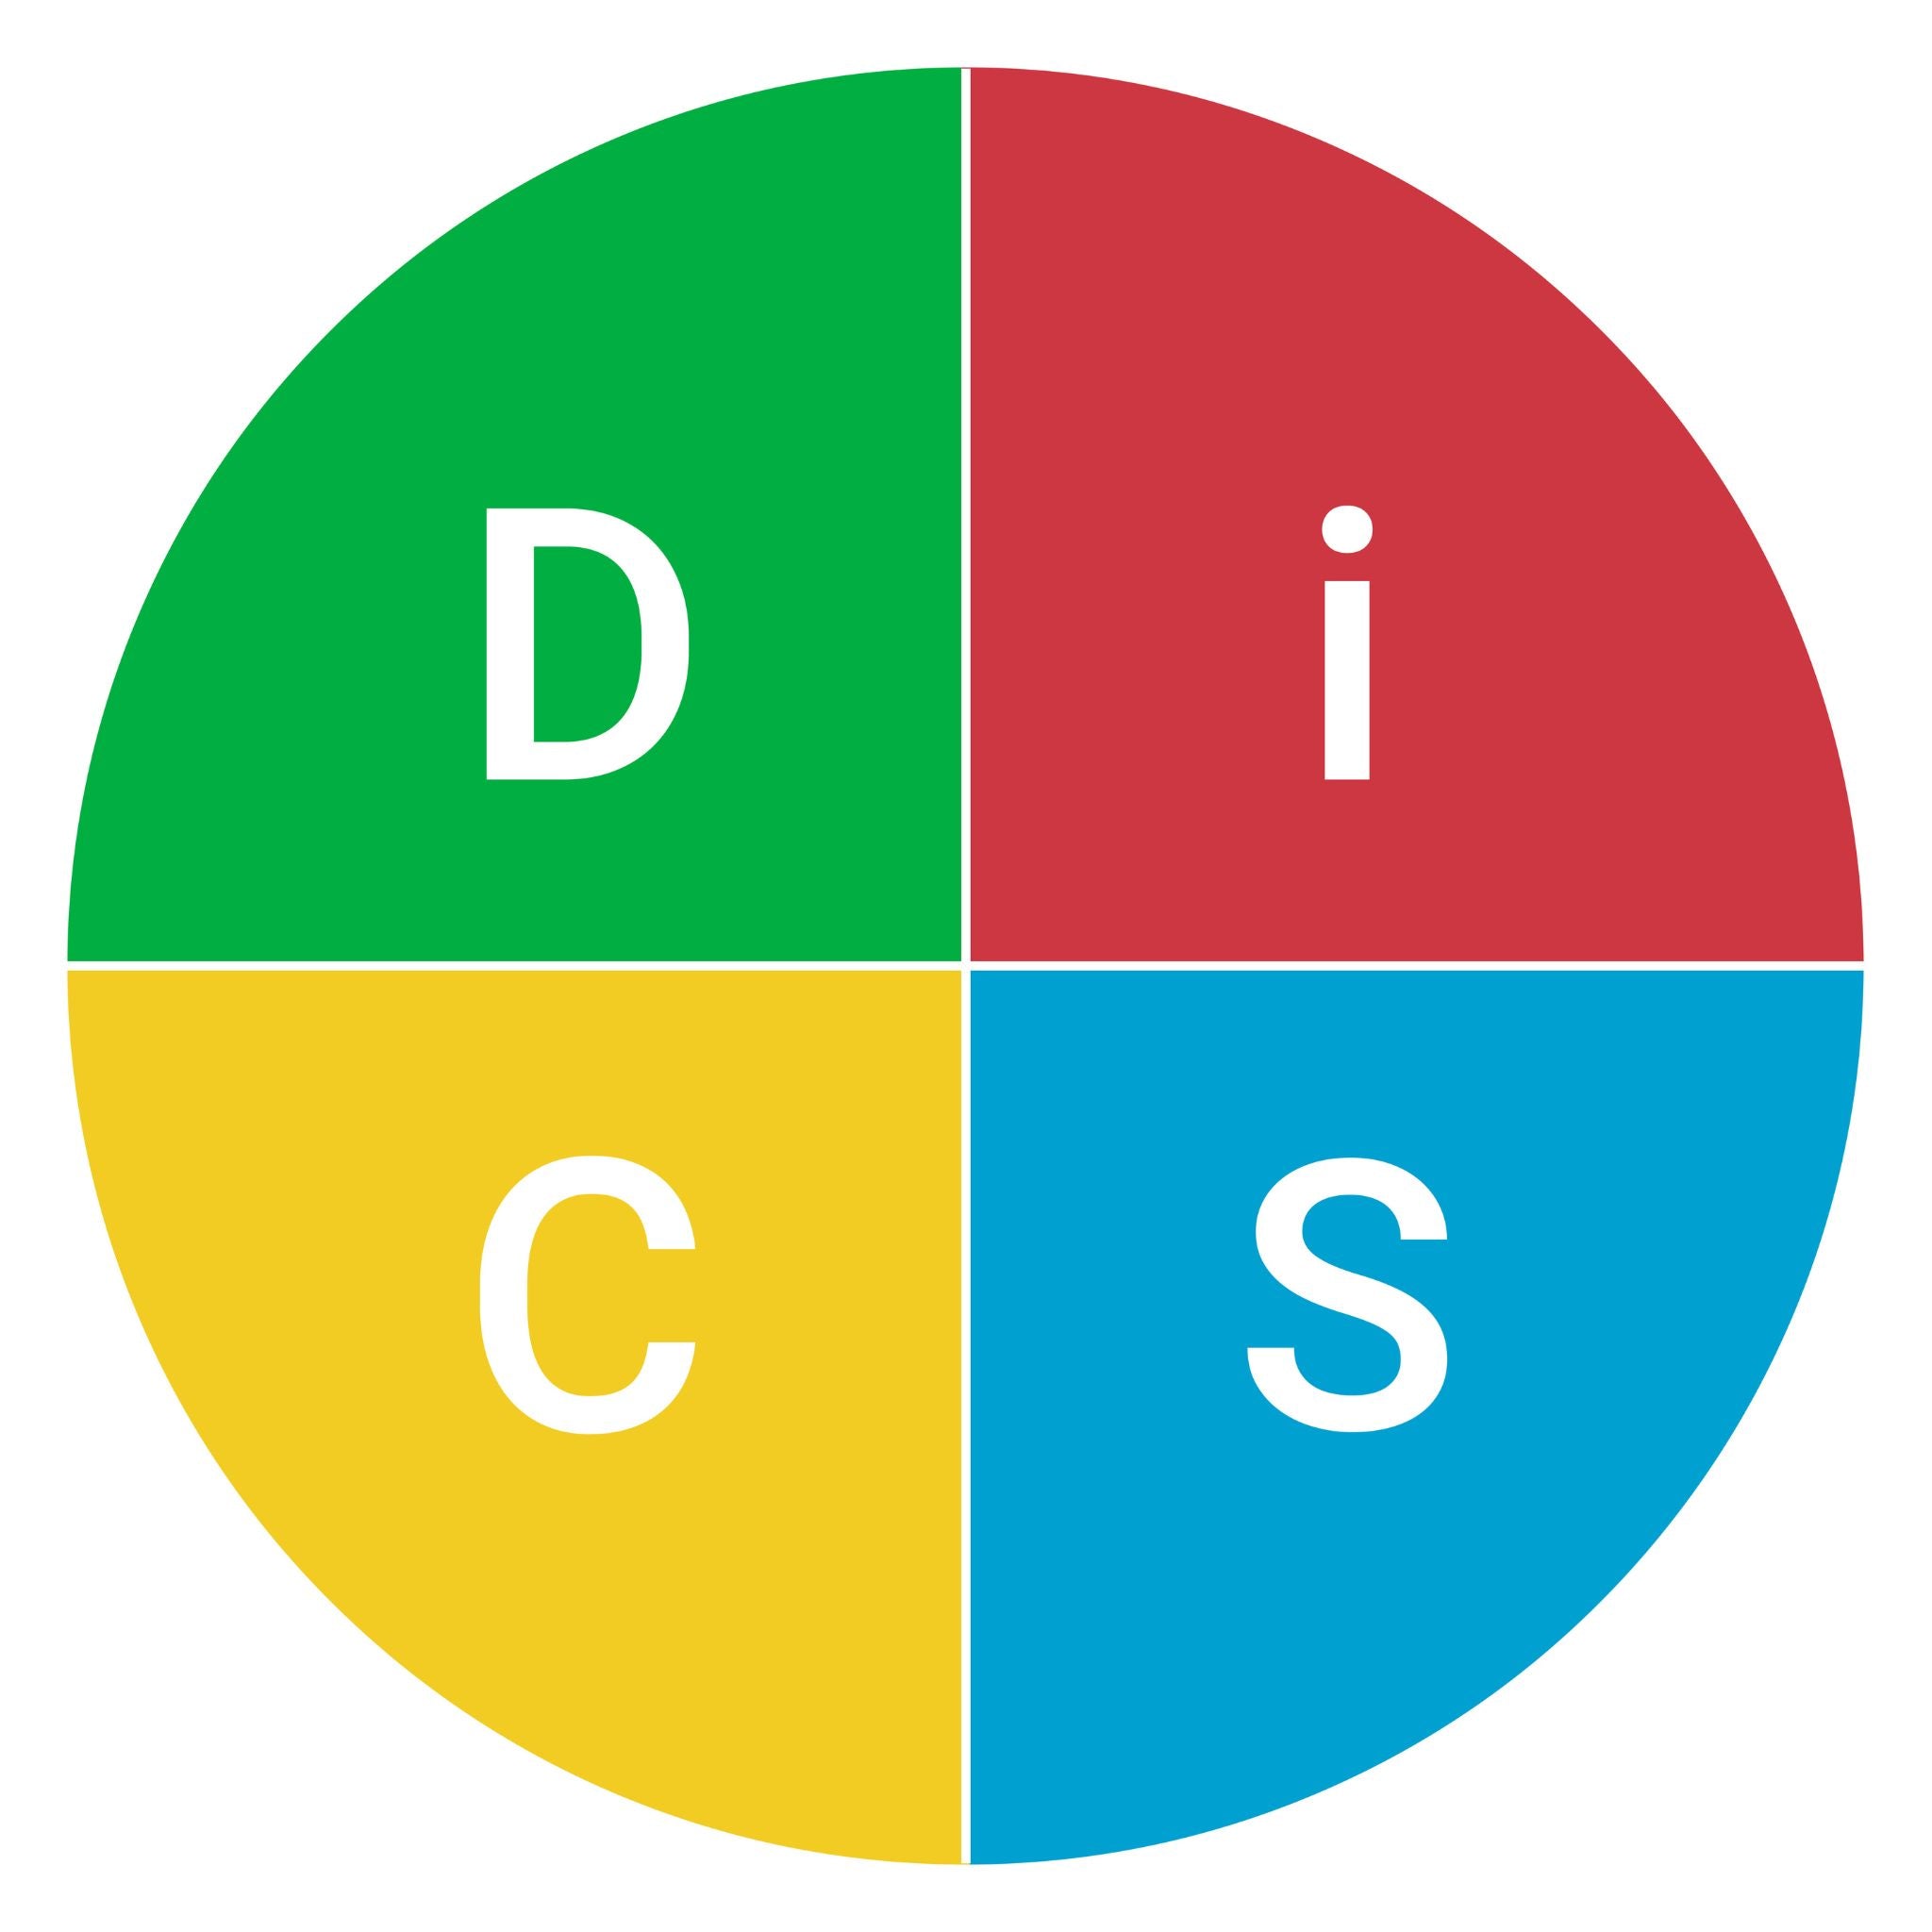 Learn how DiSC personality profiling came about